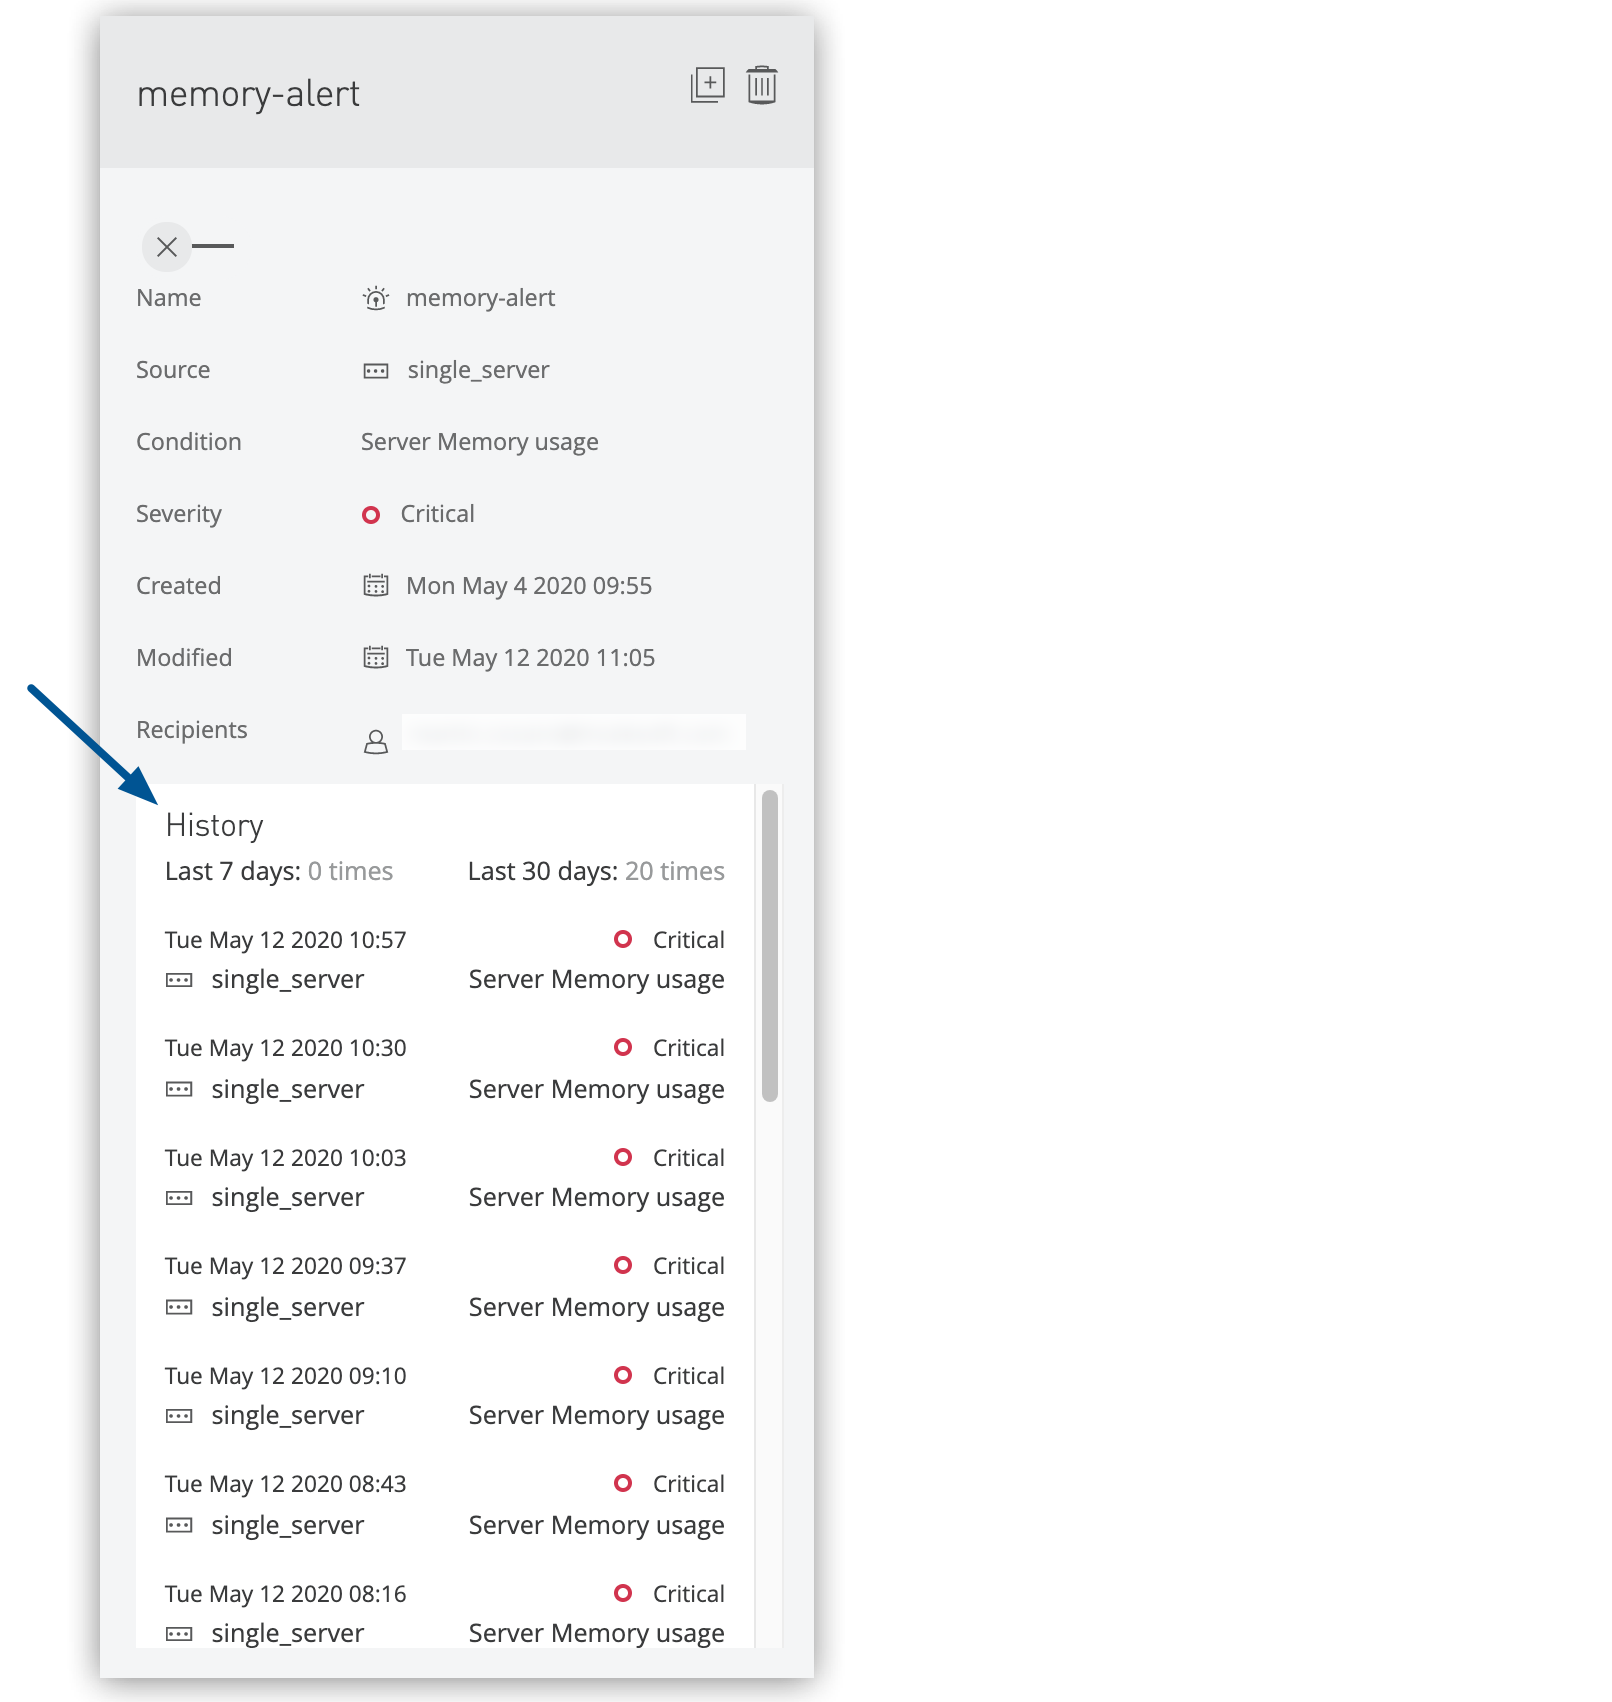 Alert history in the details pane